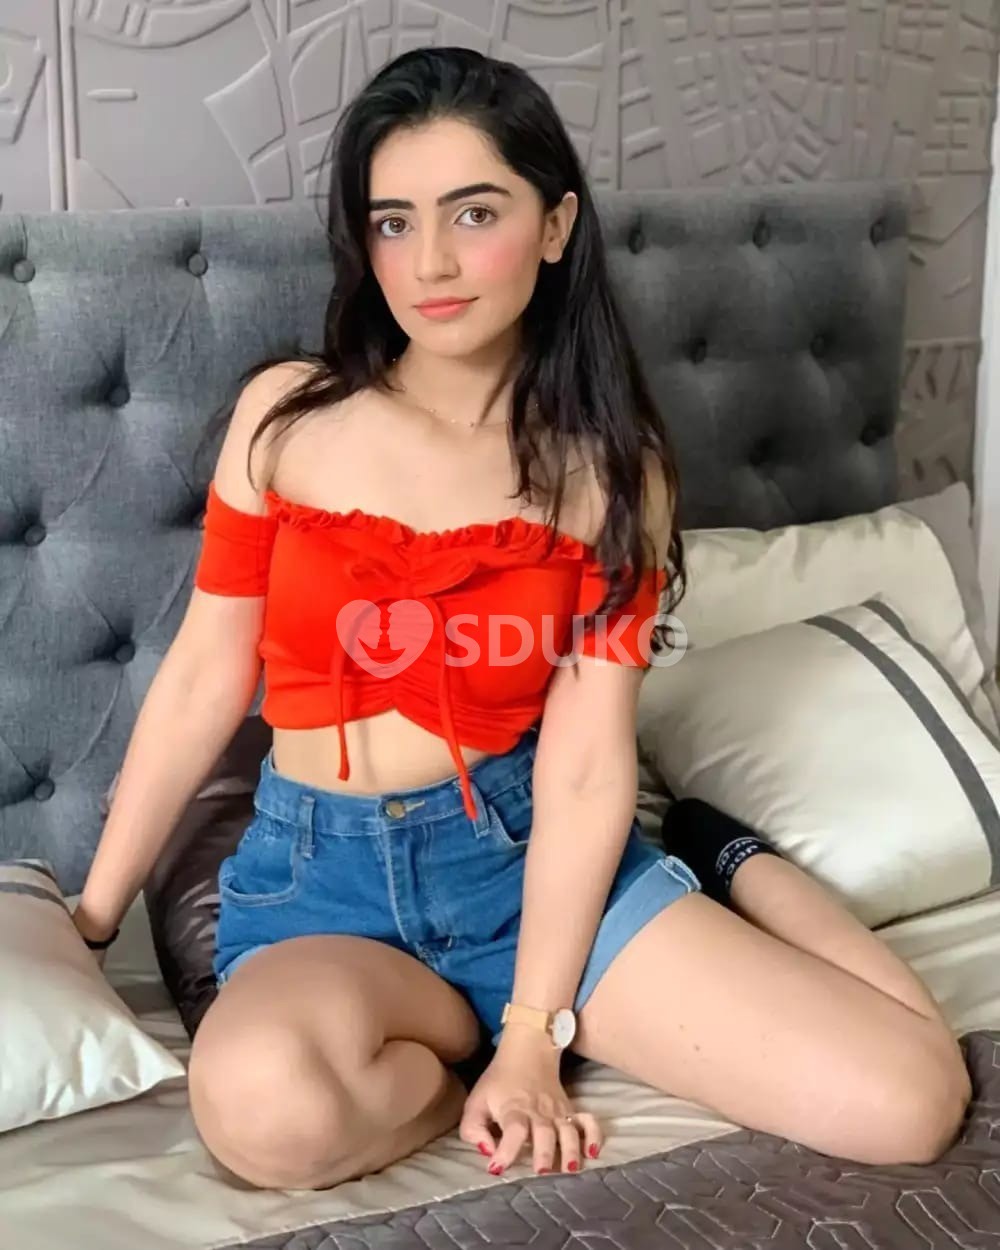 (DWARKA ⭐💫) 24x7 AFFORDABLE CHEAPEST RATE SAFE CALL GIRL SERVICE OUTCALL AVAILABLE